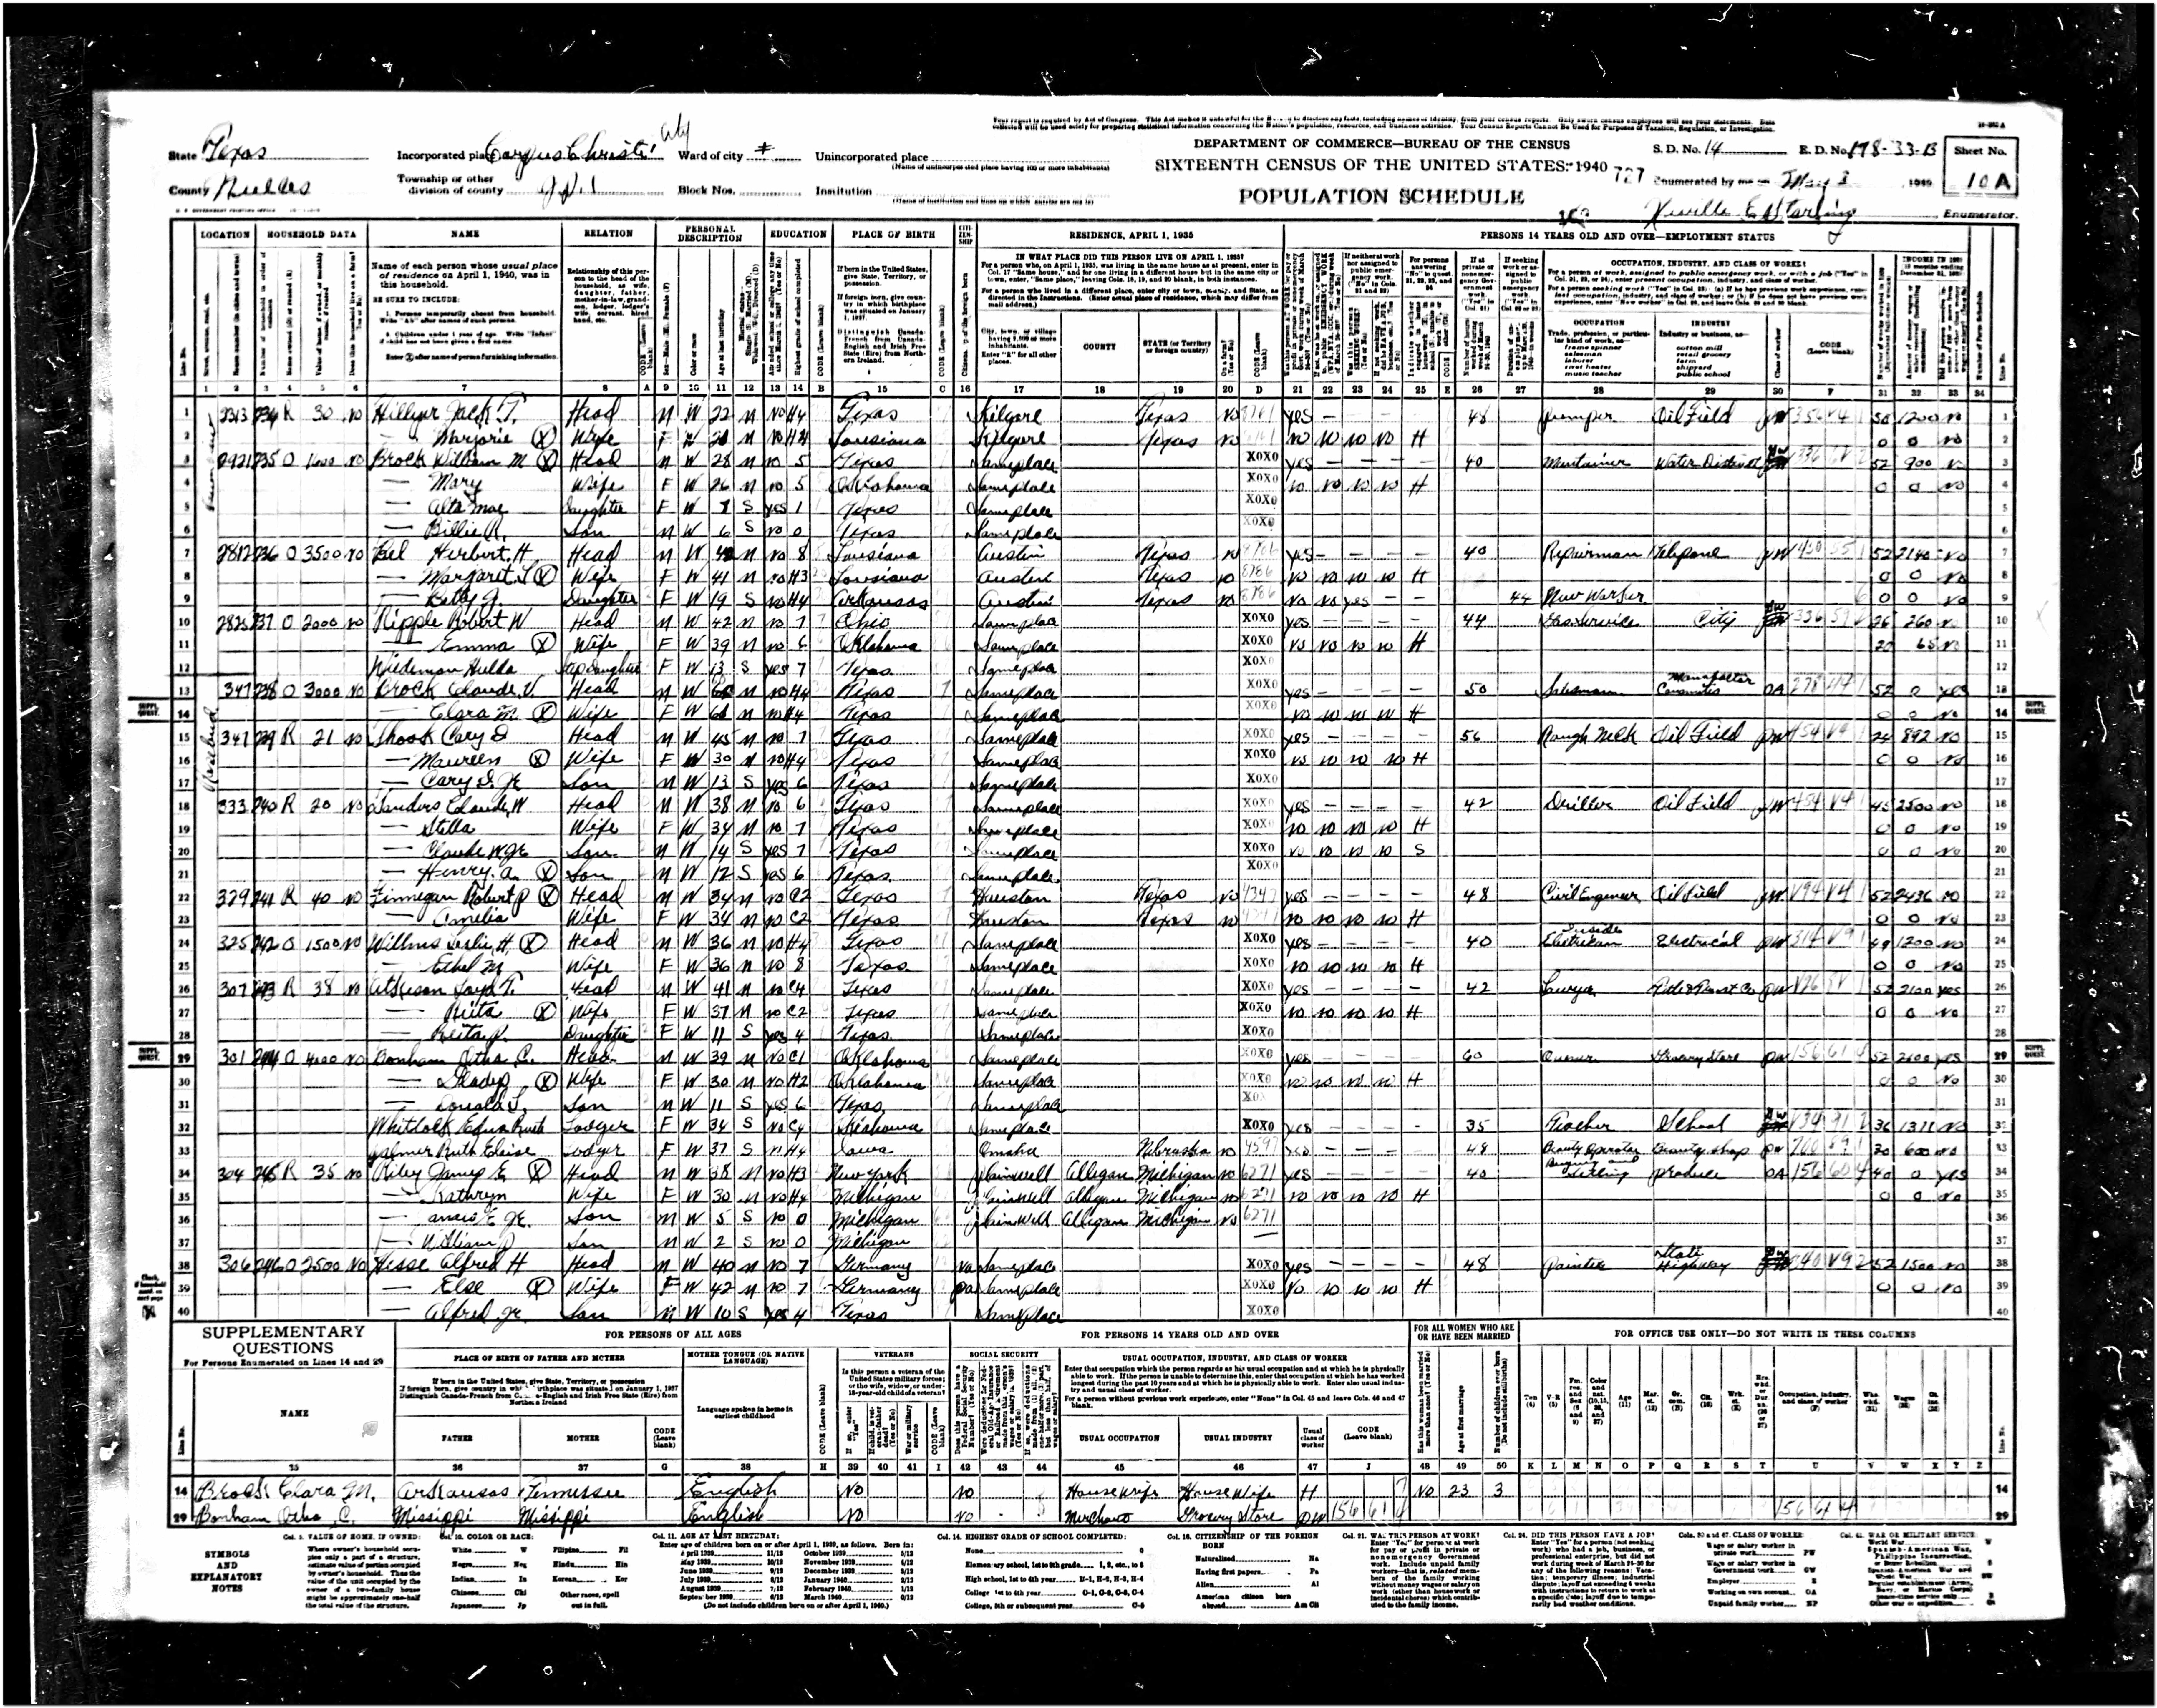 Nueces County Birth Certificate Application